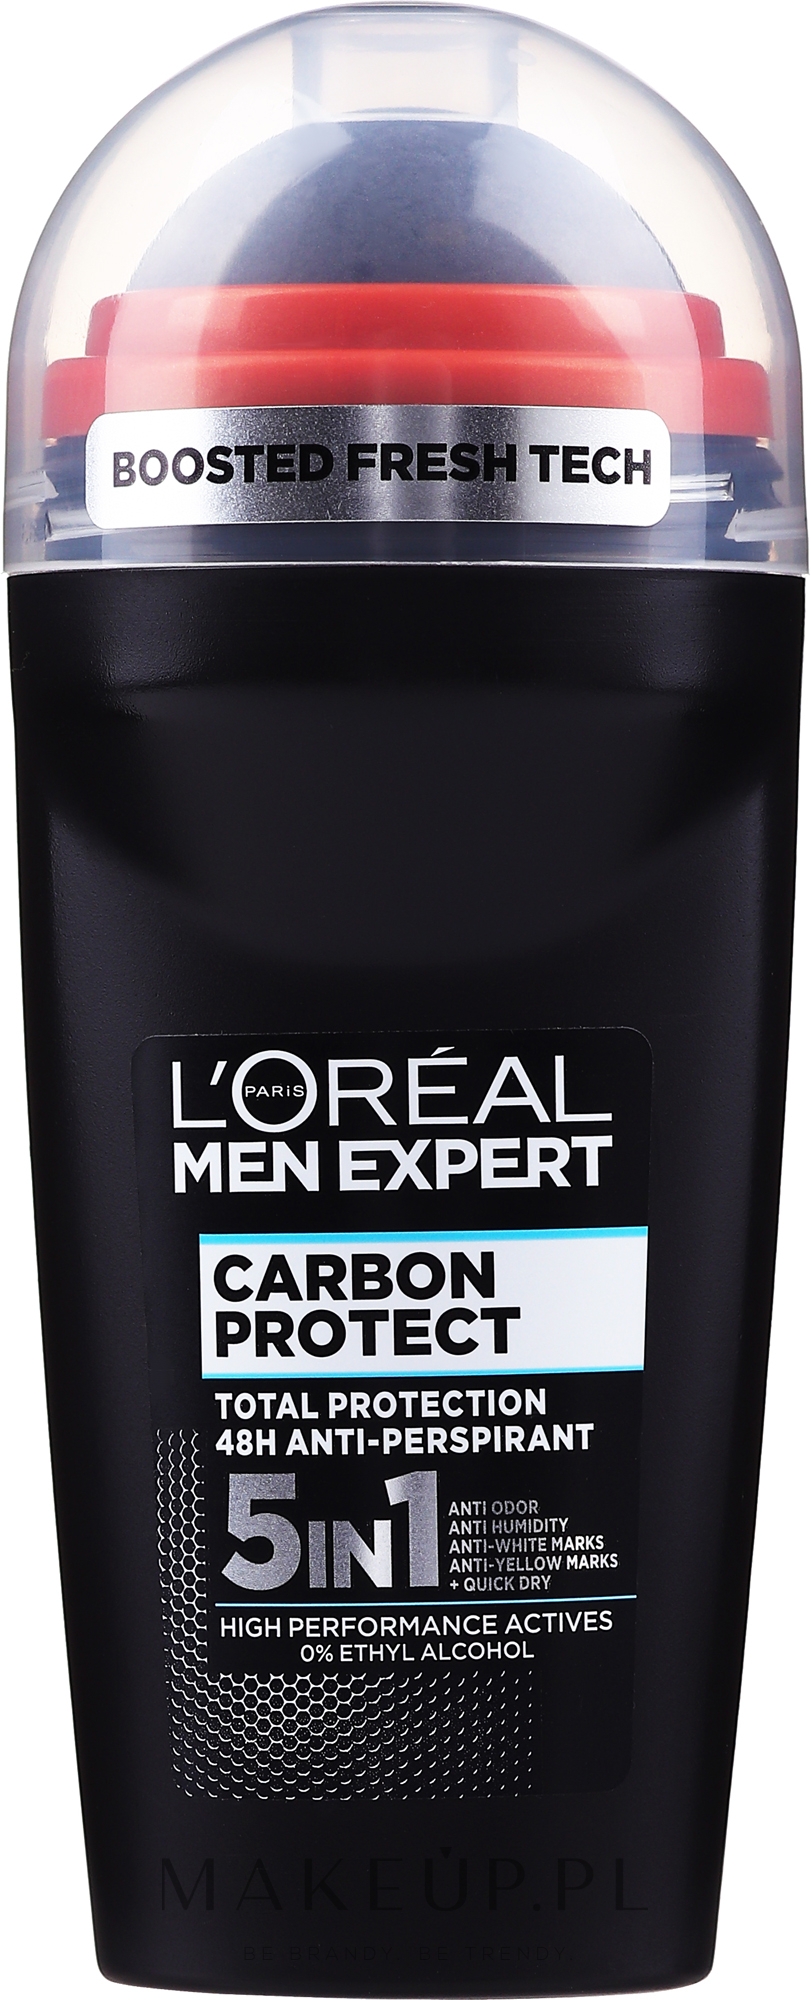 Antyperspirant w kulce - L'Oreal Paris Men Expert Carbon Protect Anti-Perspirant Intense Ice Deo Roll-On — Zdjęcie 50 ml